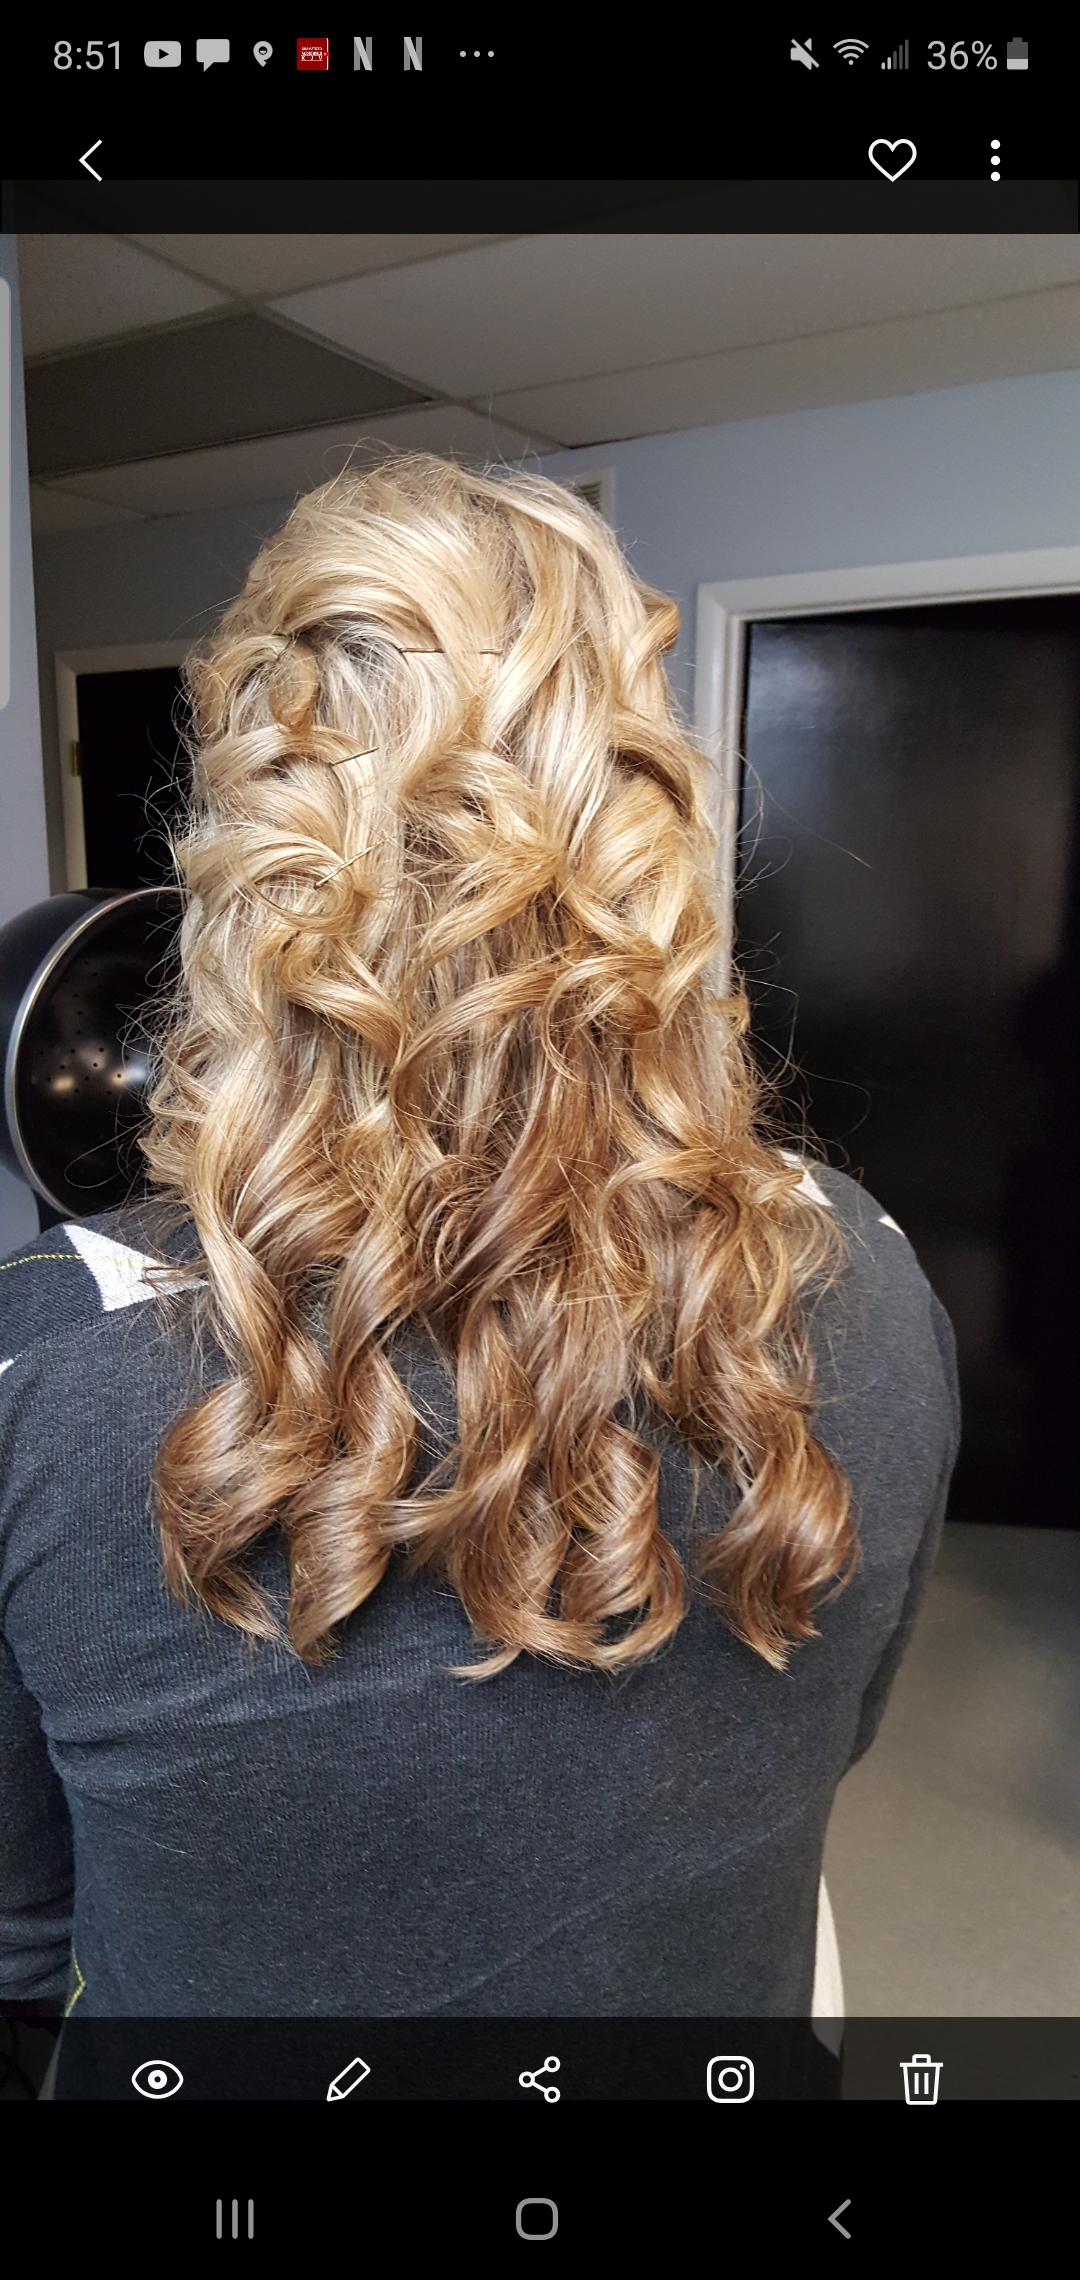 Blowdry And Curling Iron